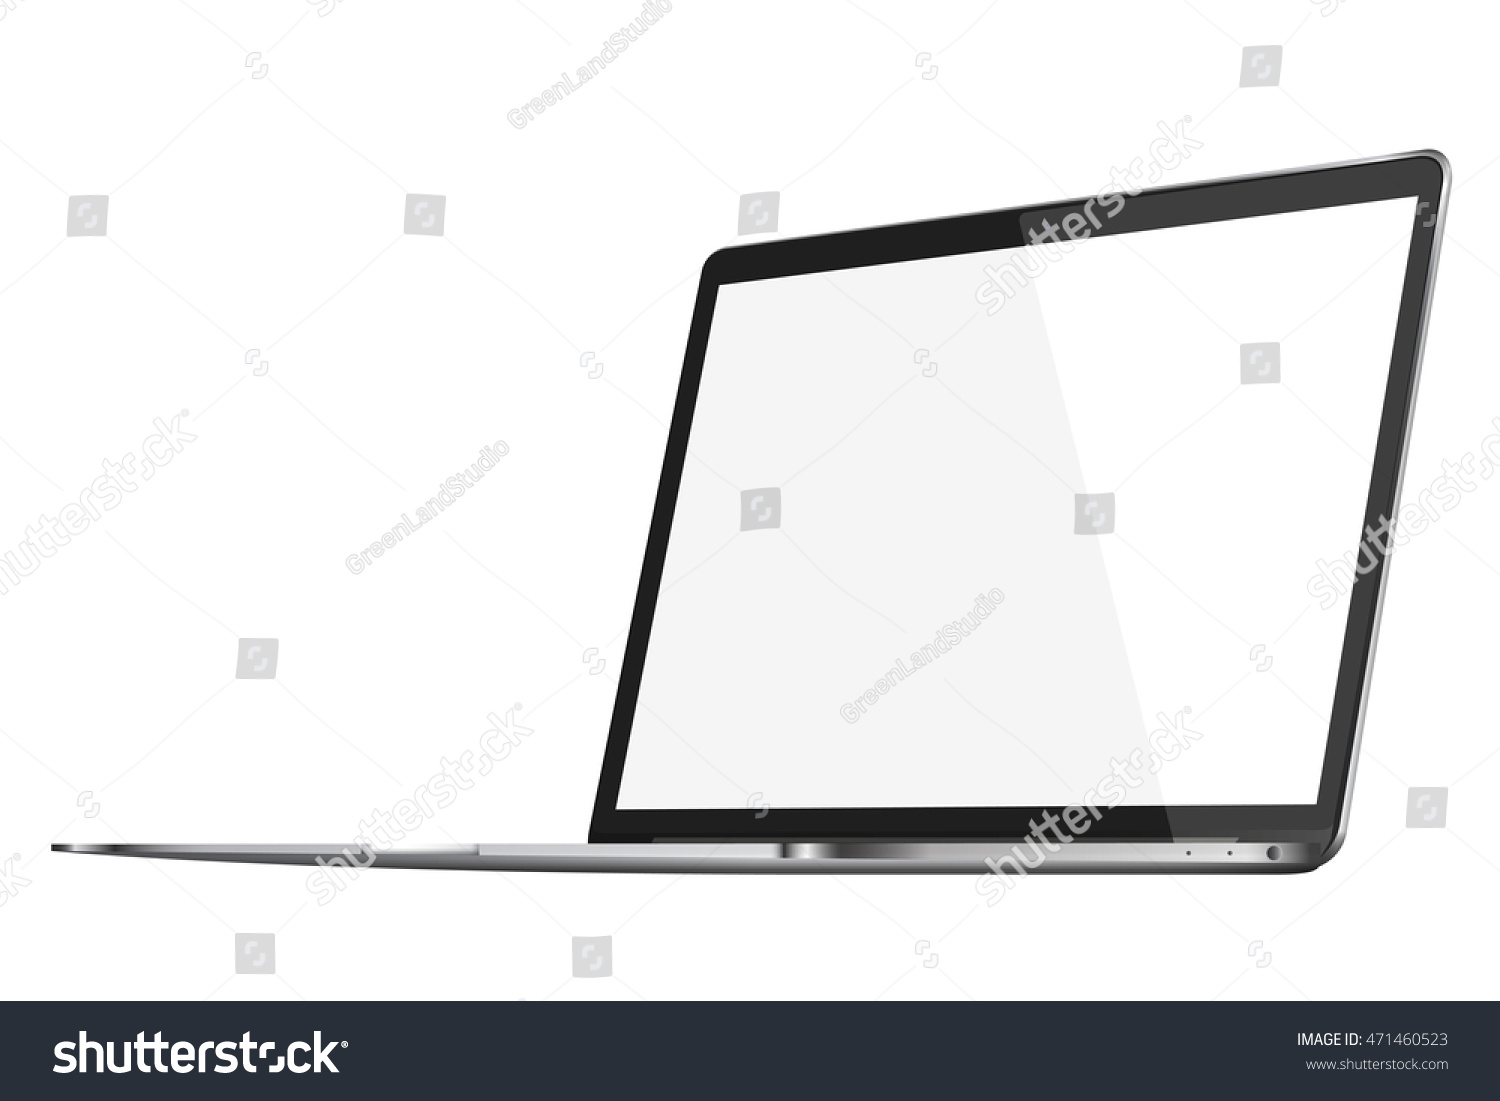 Modern Glossy Laptop Black Screen Isolated Stock Vector Royalty Free 471460523 Shutterstock 7101